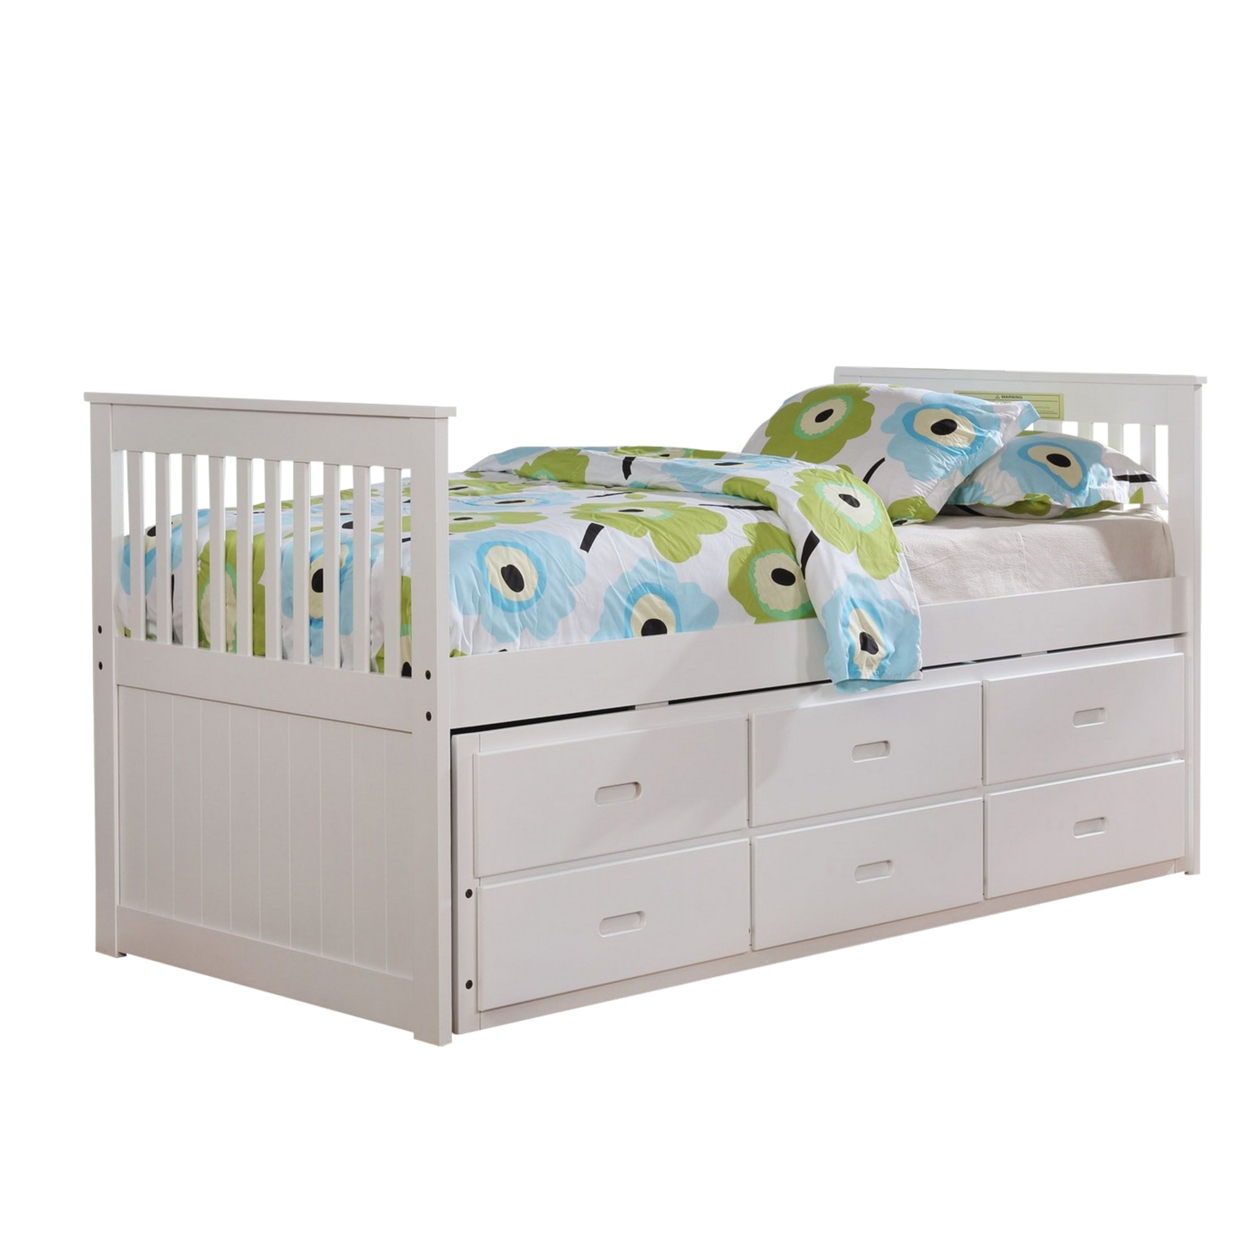 Mission Style Wooden Twin Captain Bed With Trundle And 3 Drawers, White- Saltoro Sherpi